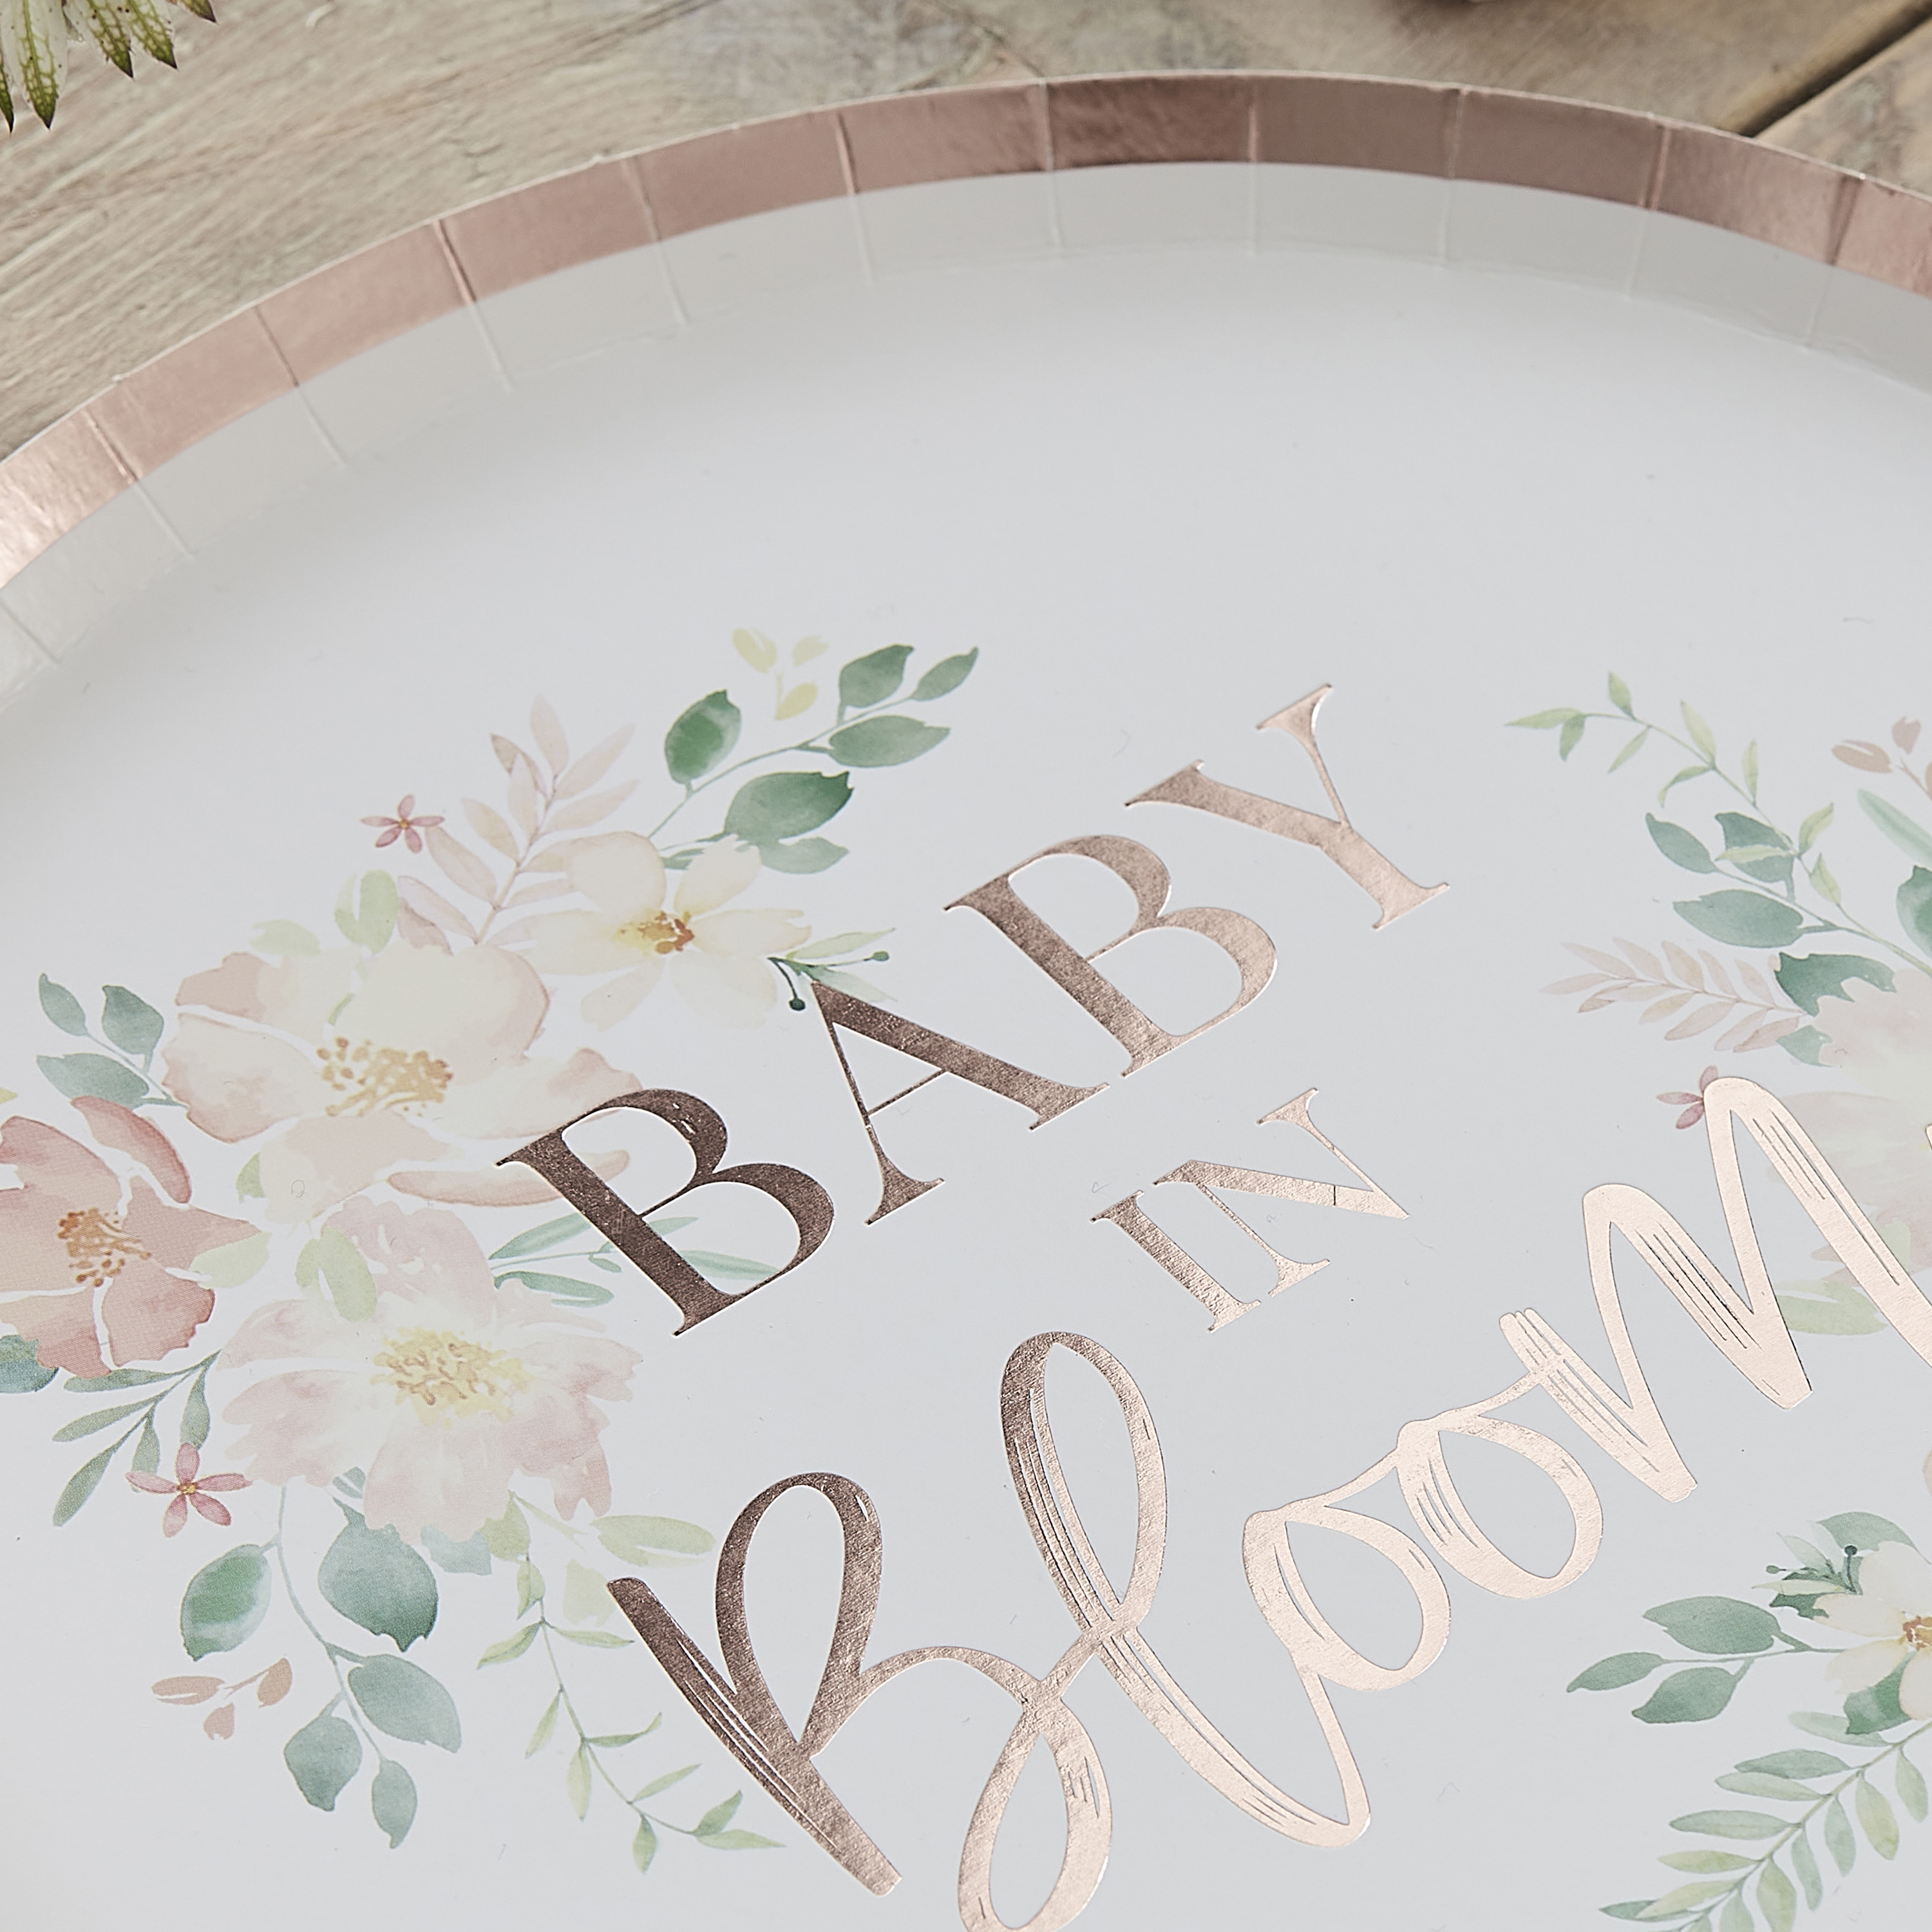 8 Plate - Floral Baby in Bloom - Foiled